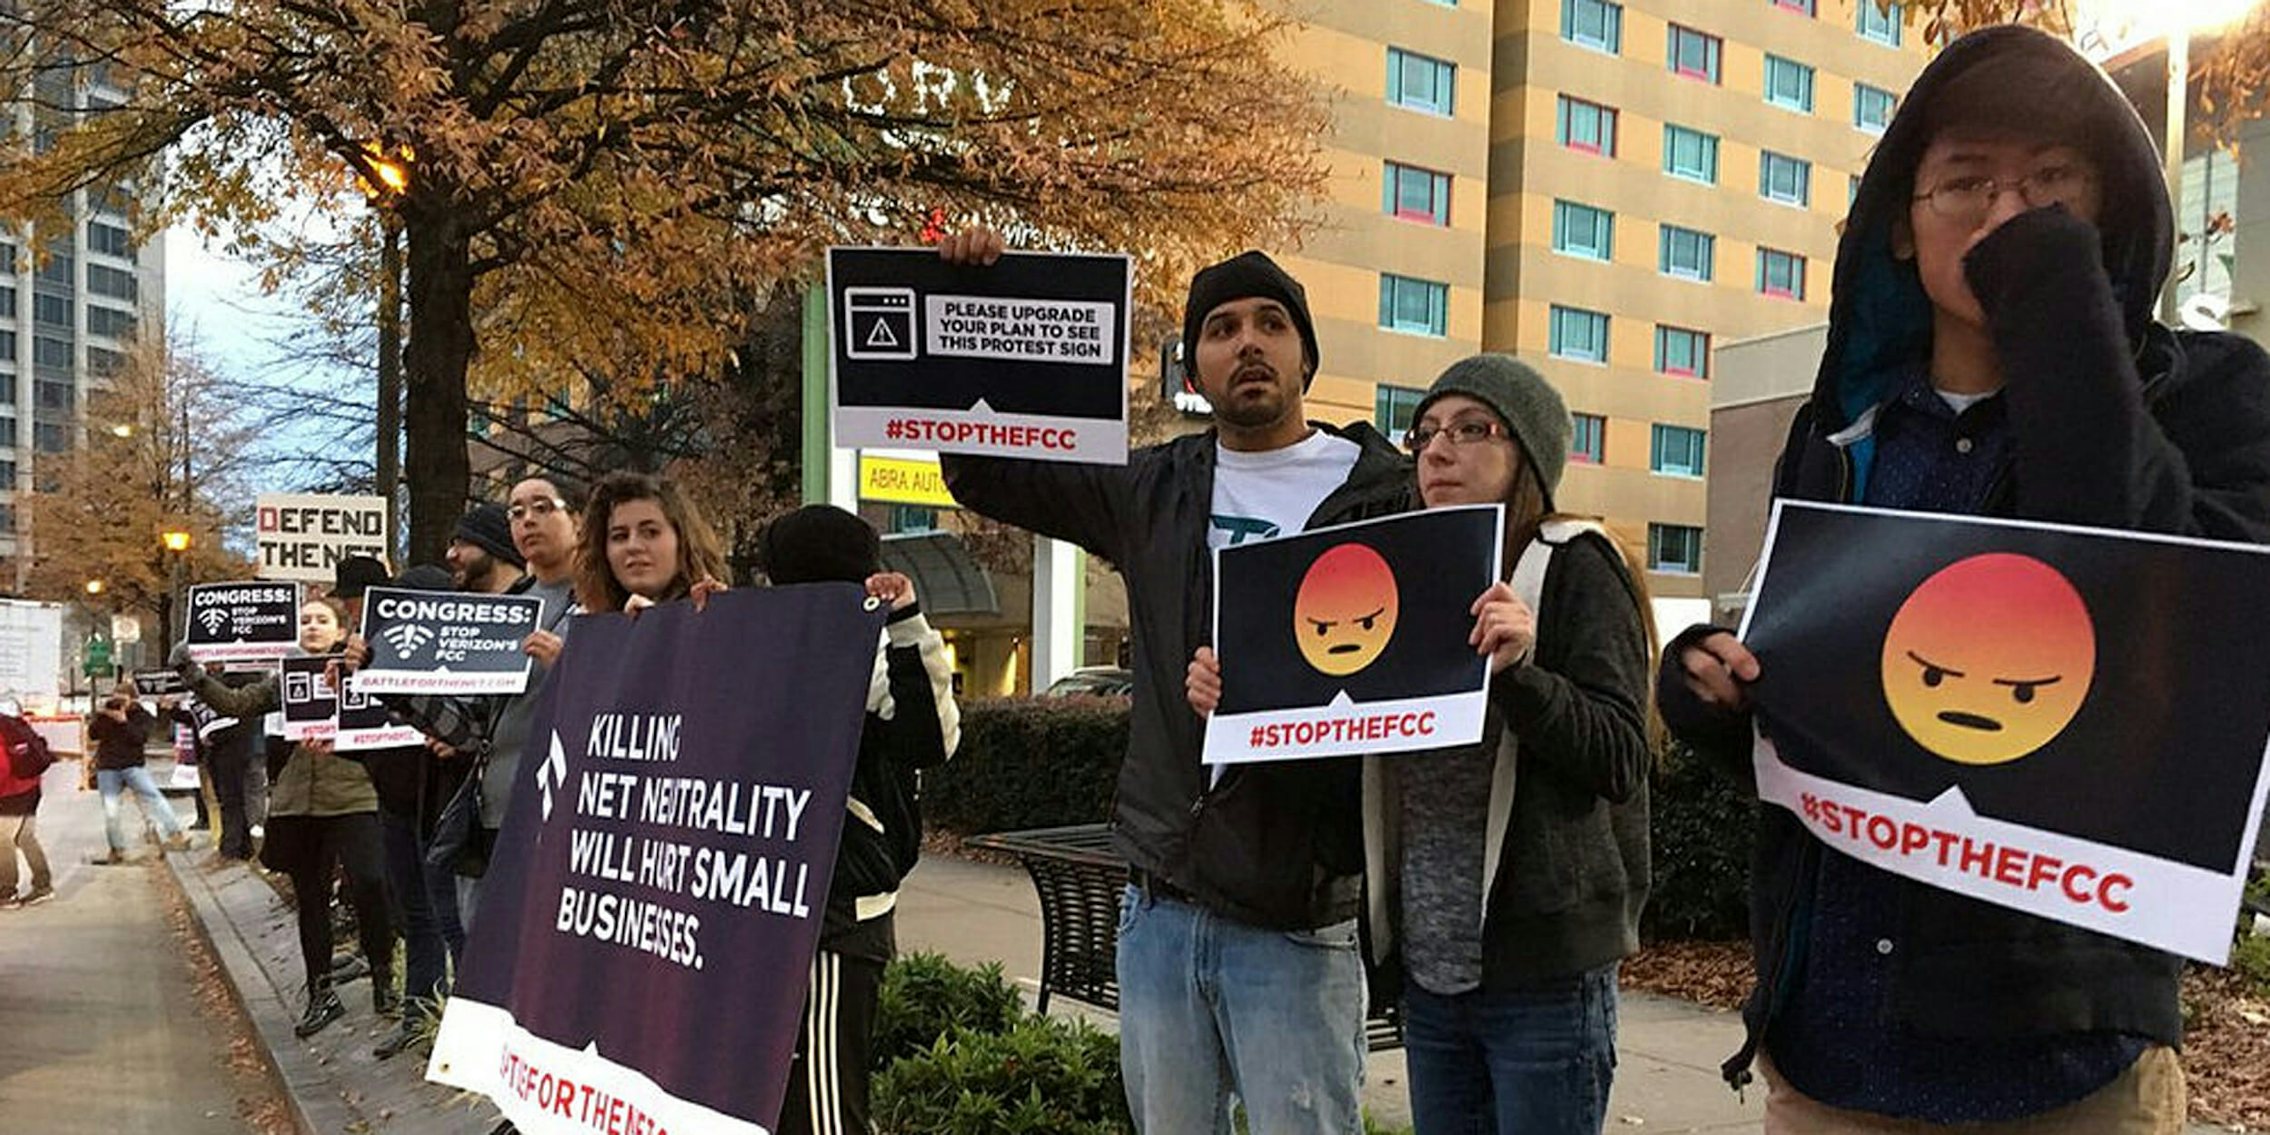 Internet activists are urging people to contact their representatives in Congress to overturn the Federal Communications Commission's (FCC) decision to scrap net neutrality rules despite an intense public outcry for them to stay. 